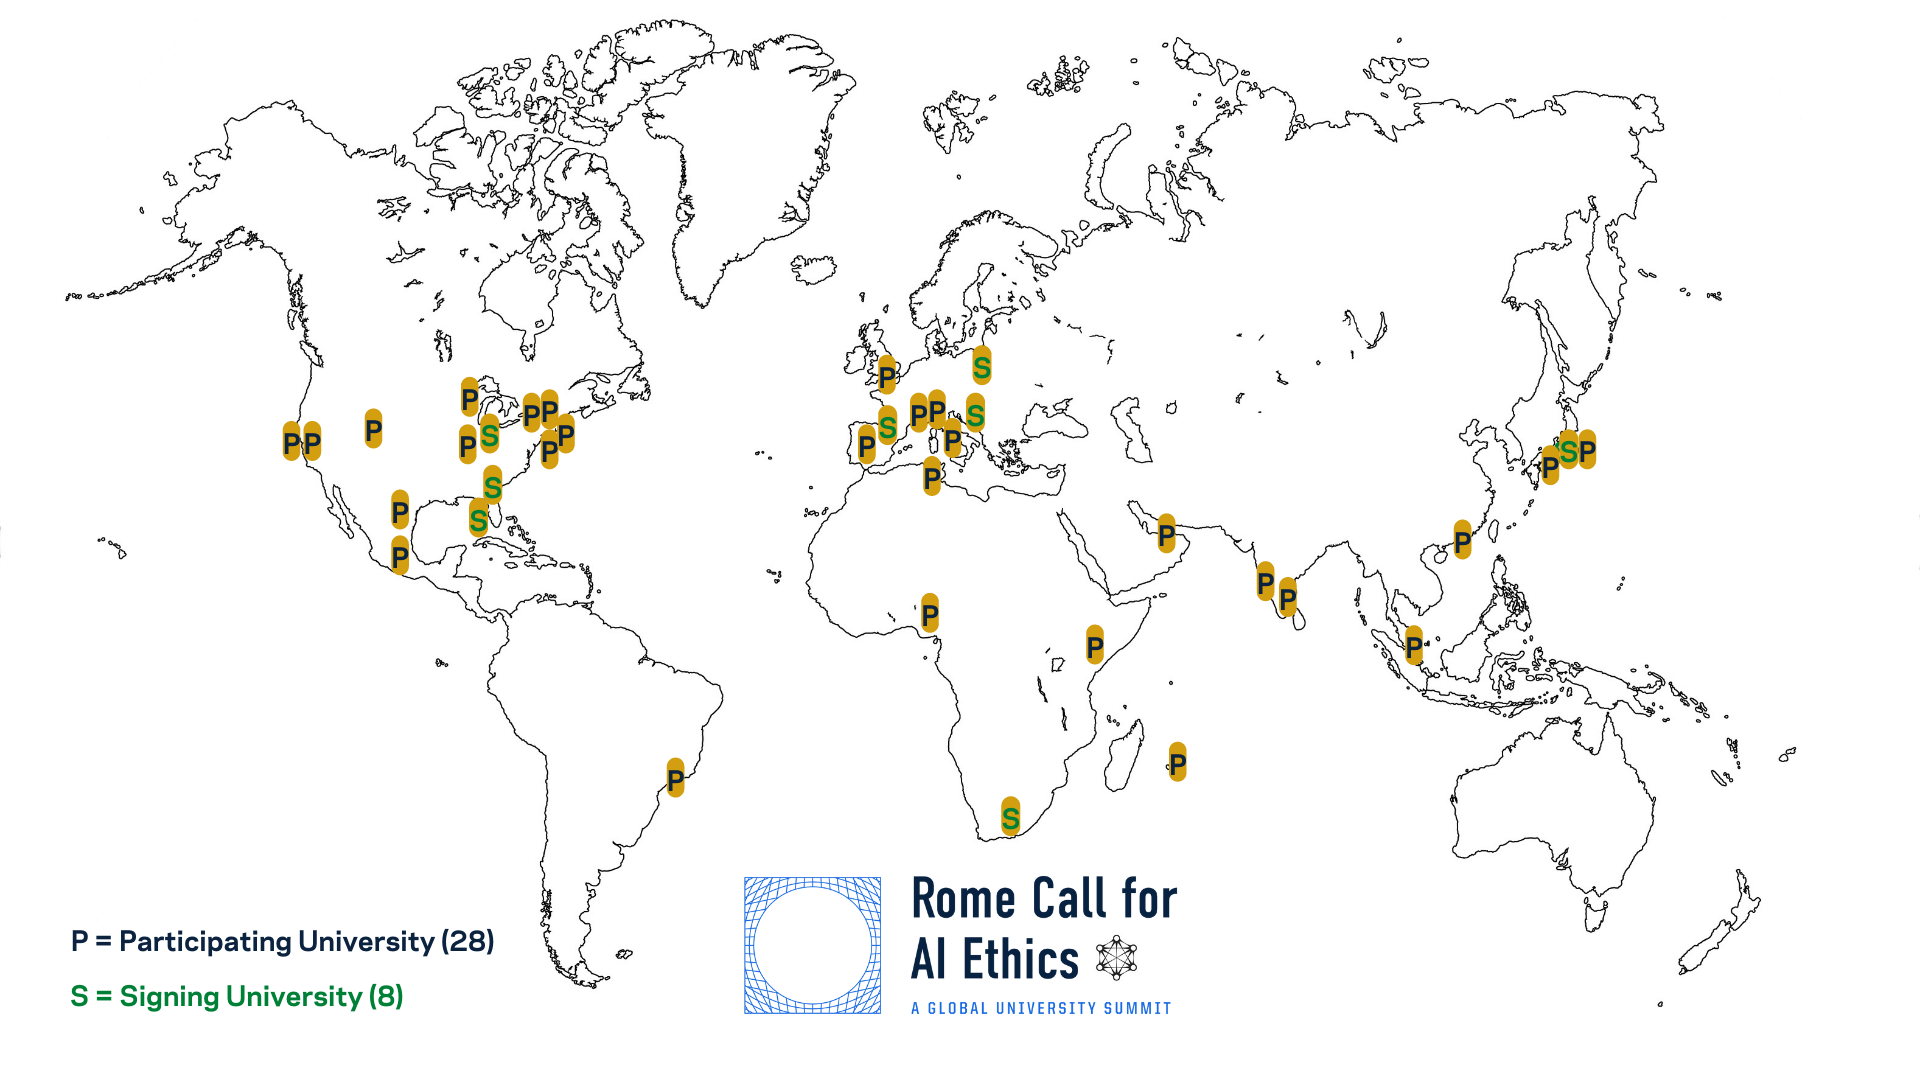 a map of the world showing the location of universities signing the Rome Call for AI Ethics (denoted with an S) or participating in the summit (denoted with a P)